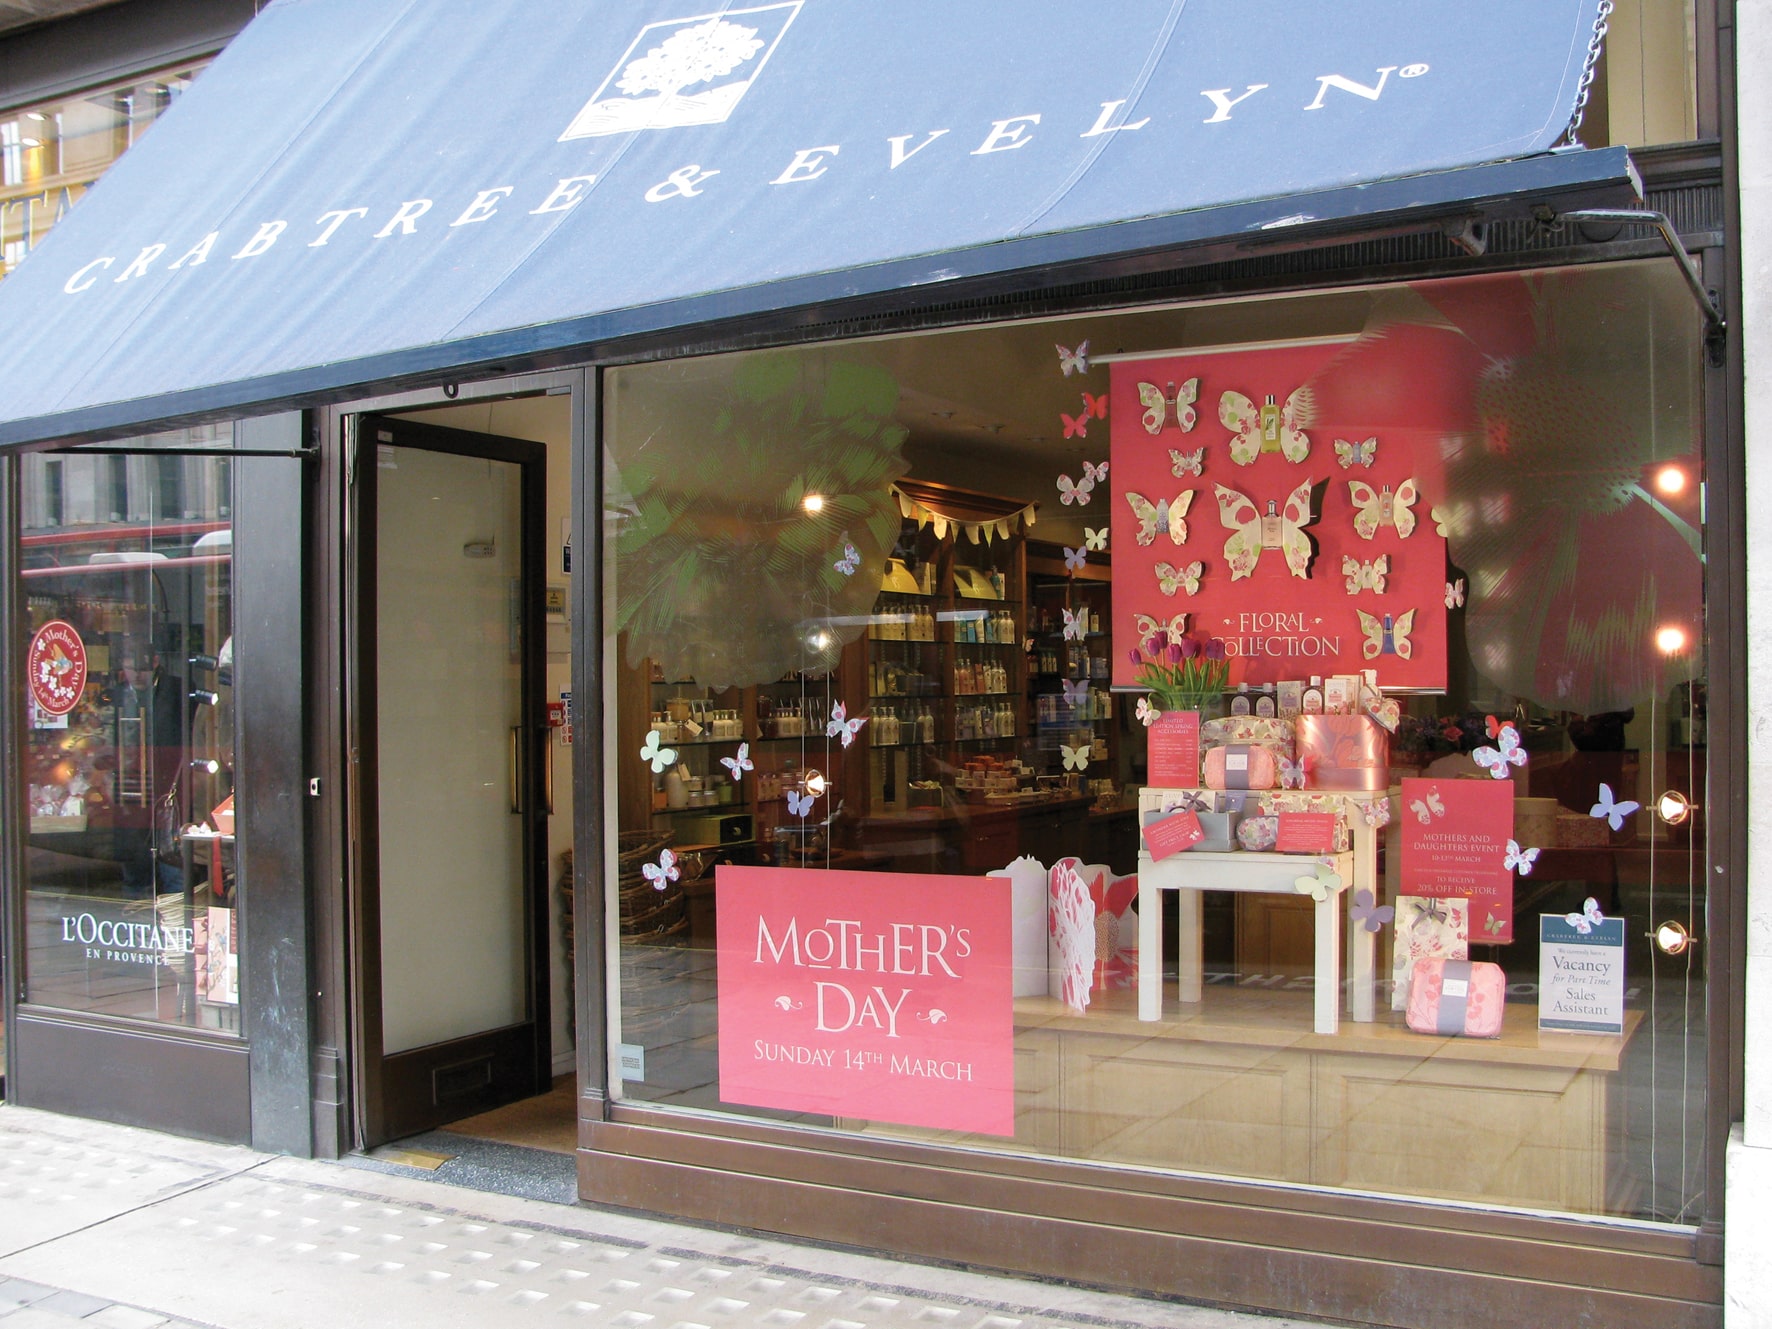  A shop front displaying a seasonal promotion by using vinyl window graphics and help to boost brand visibility.